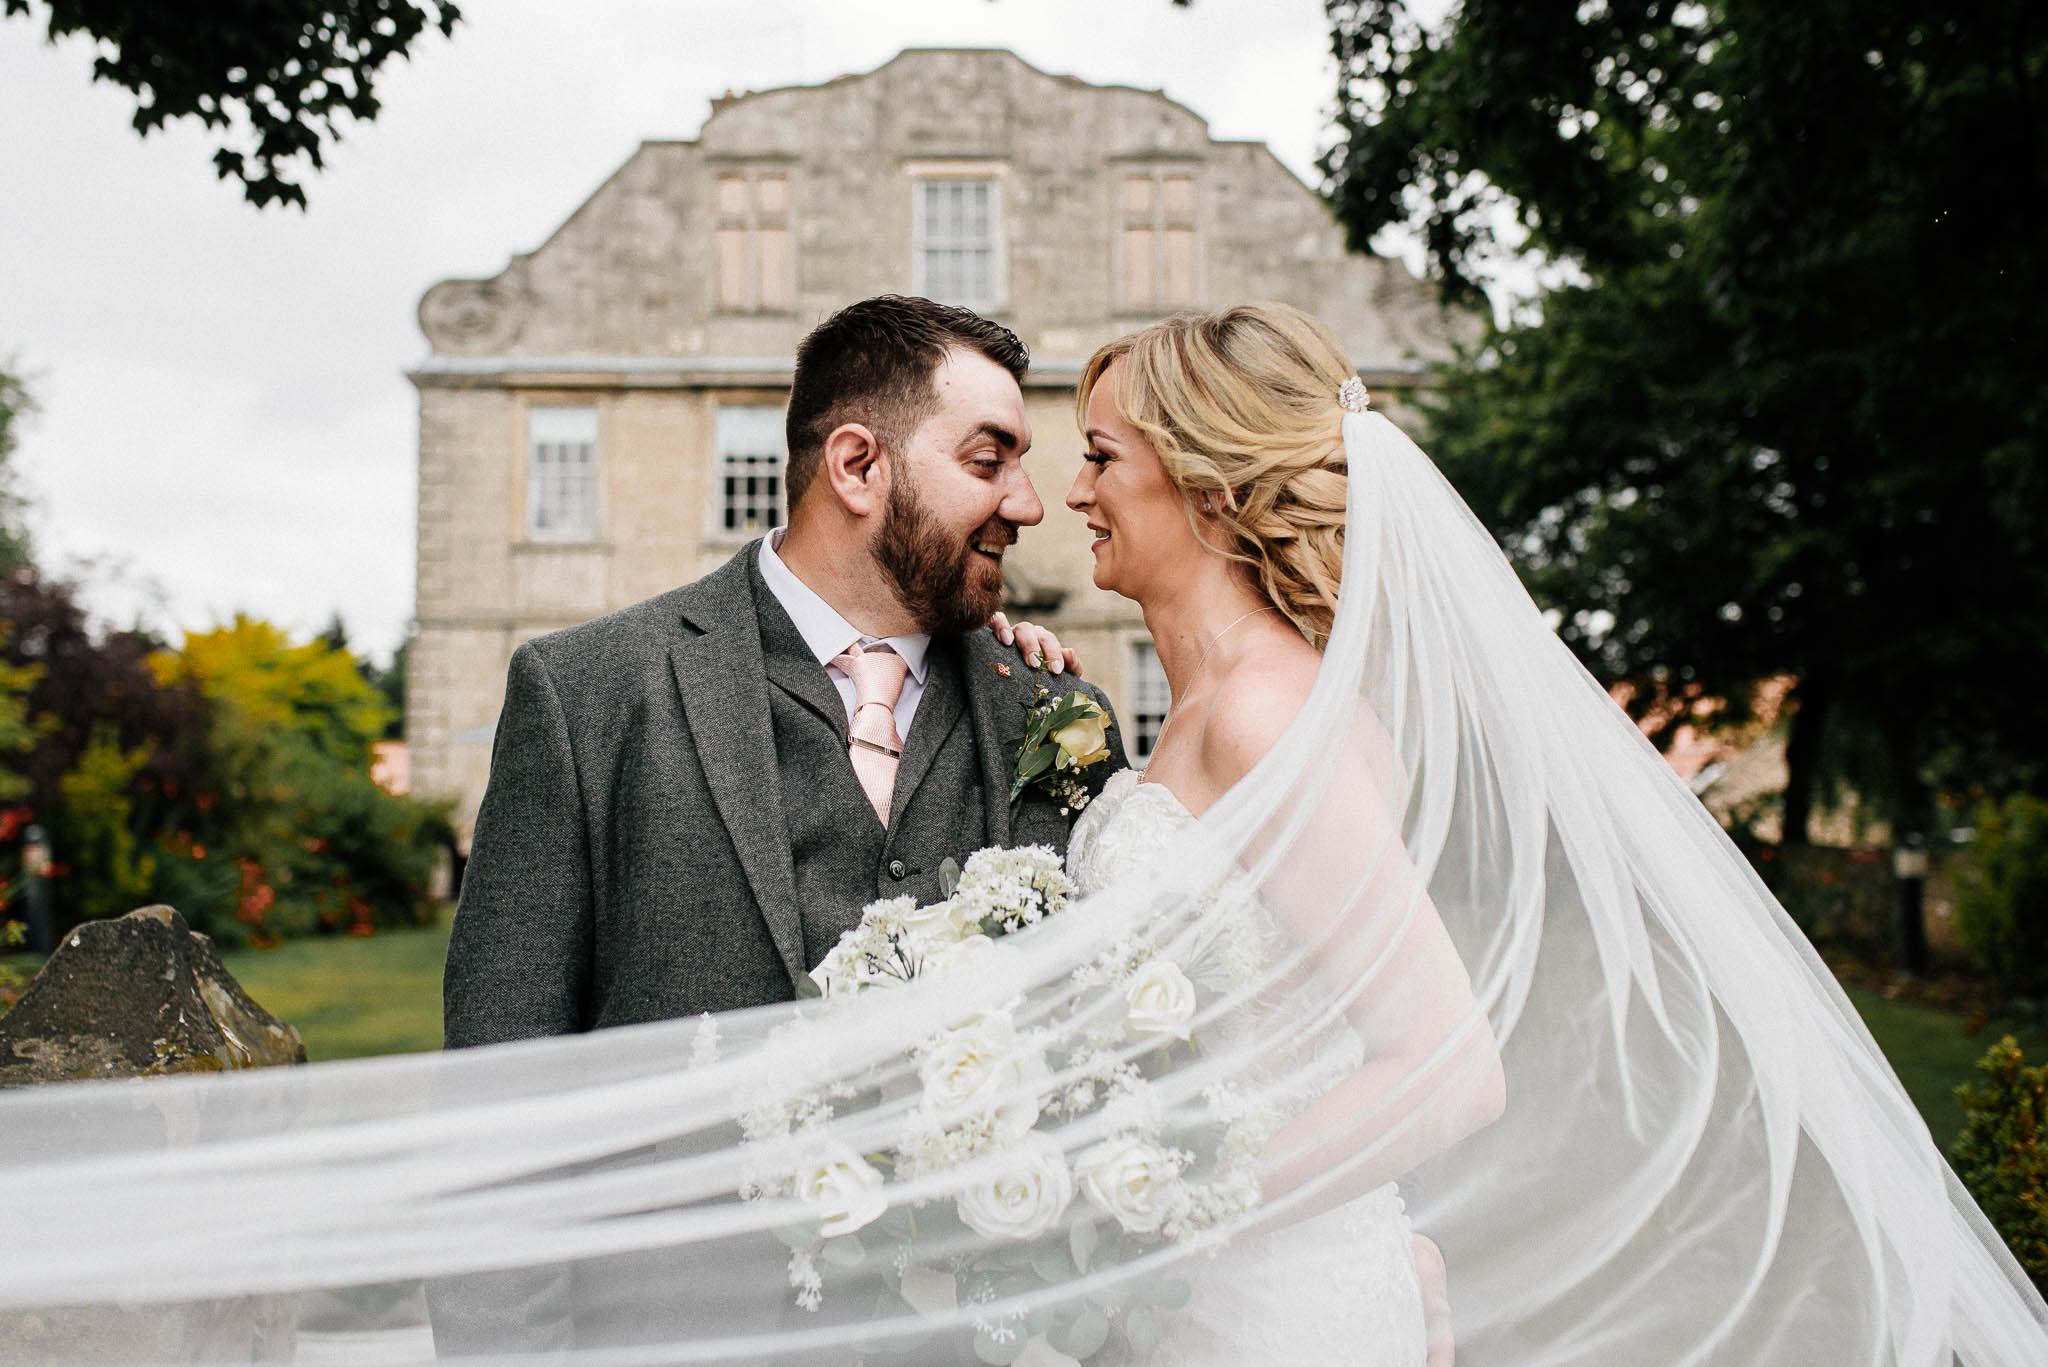 Hellaby Hall Weddings – Getting married at Hellaby Hall Hotel